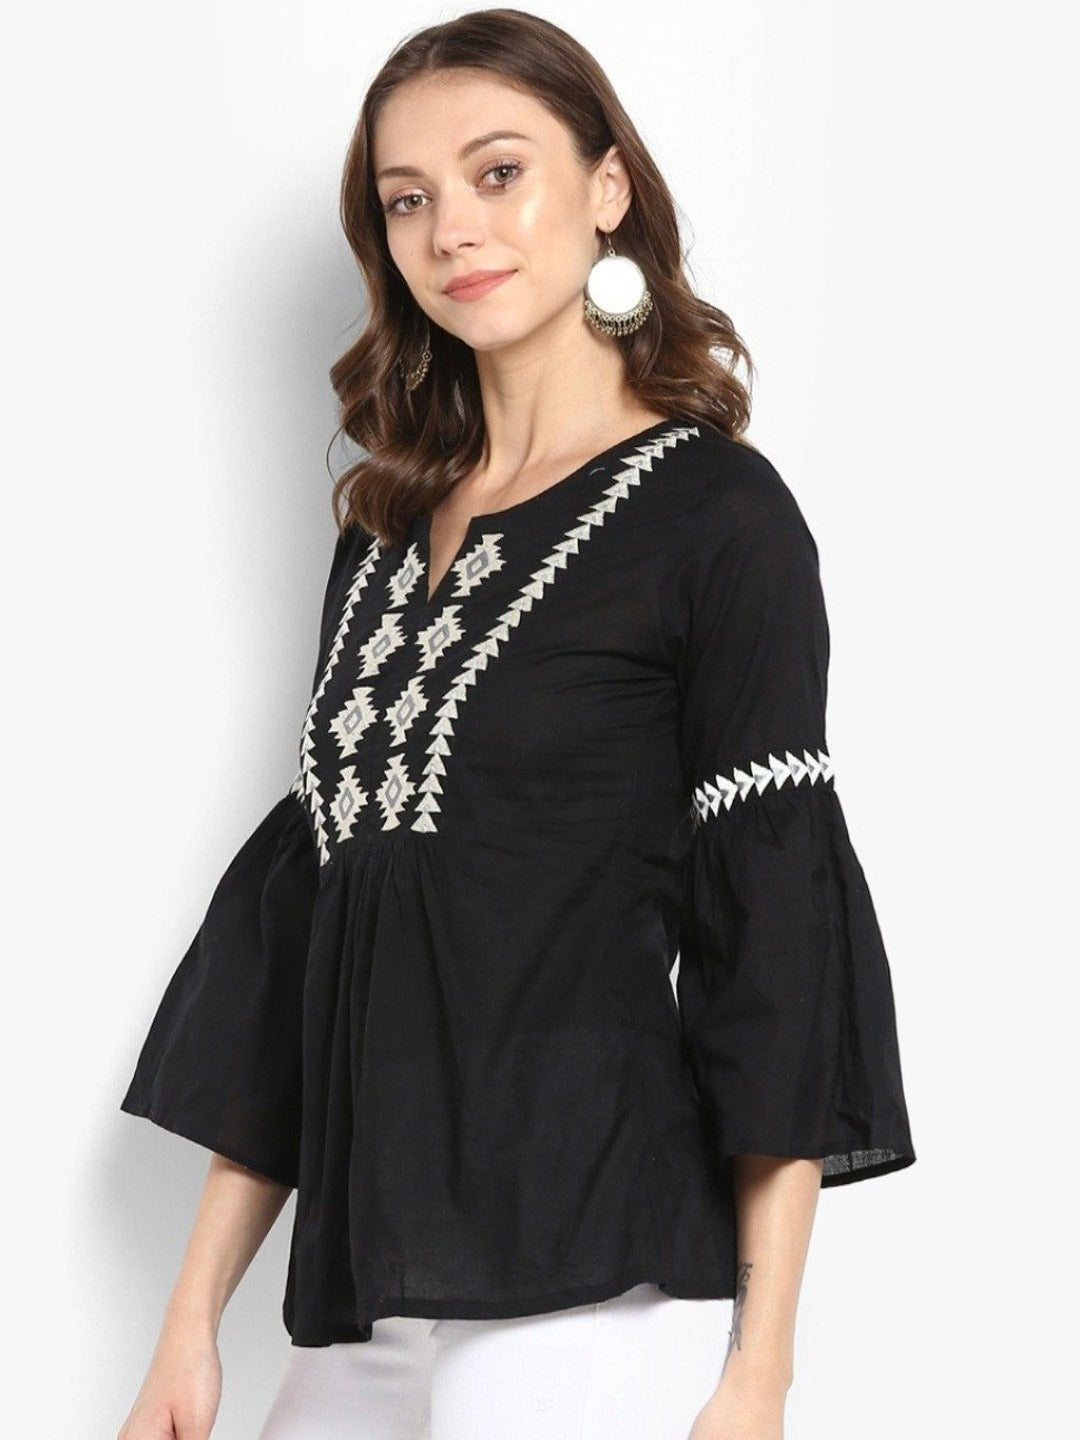 [Available] Black-White Bell Sleeve Kurti